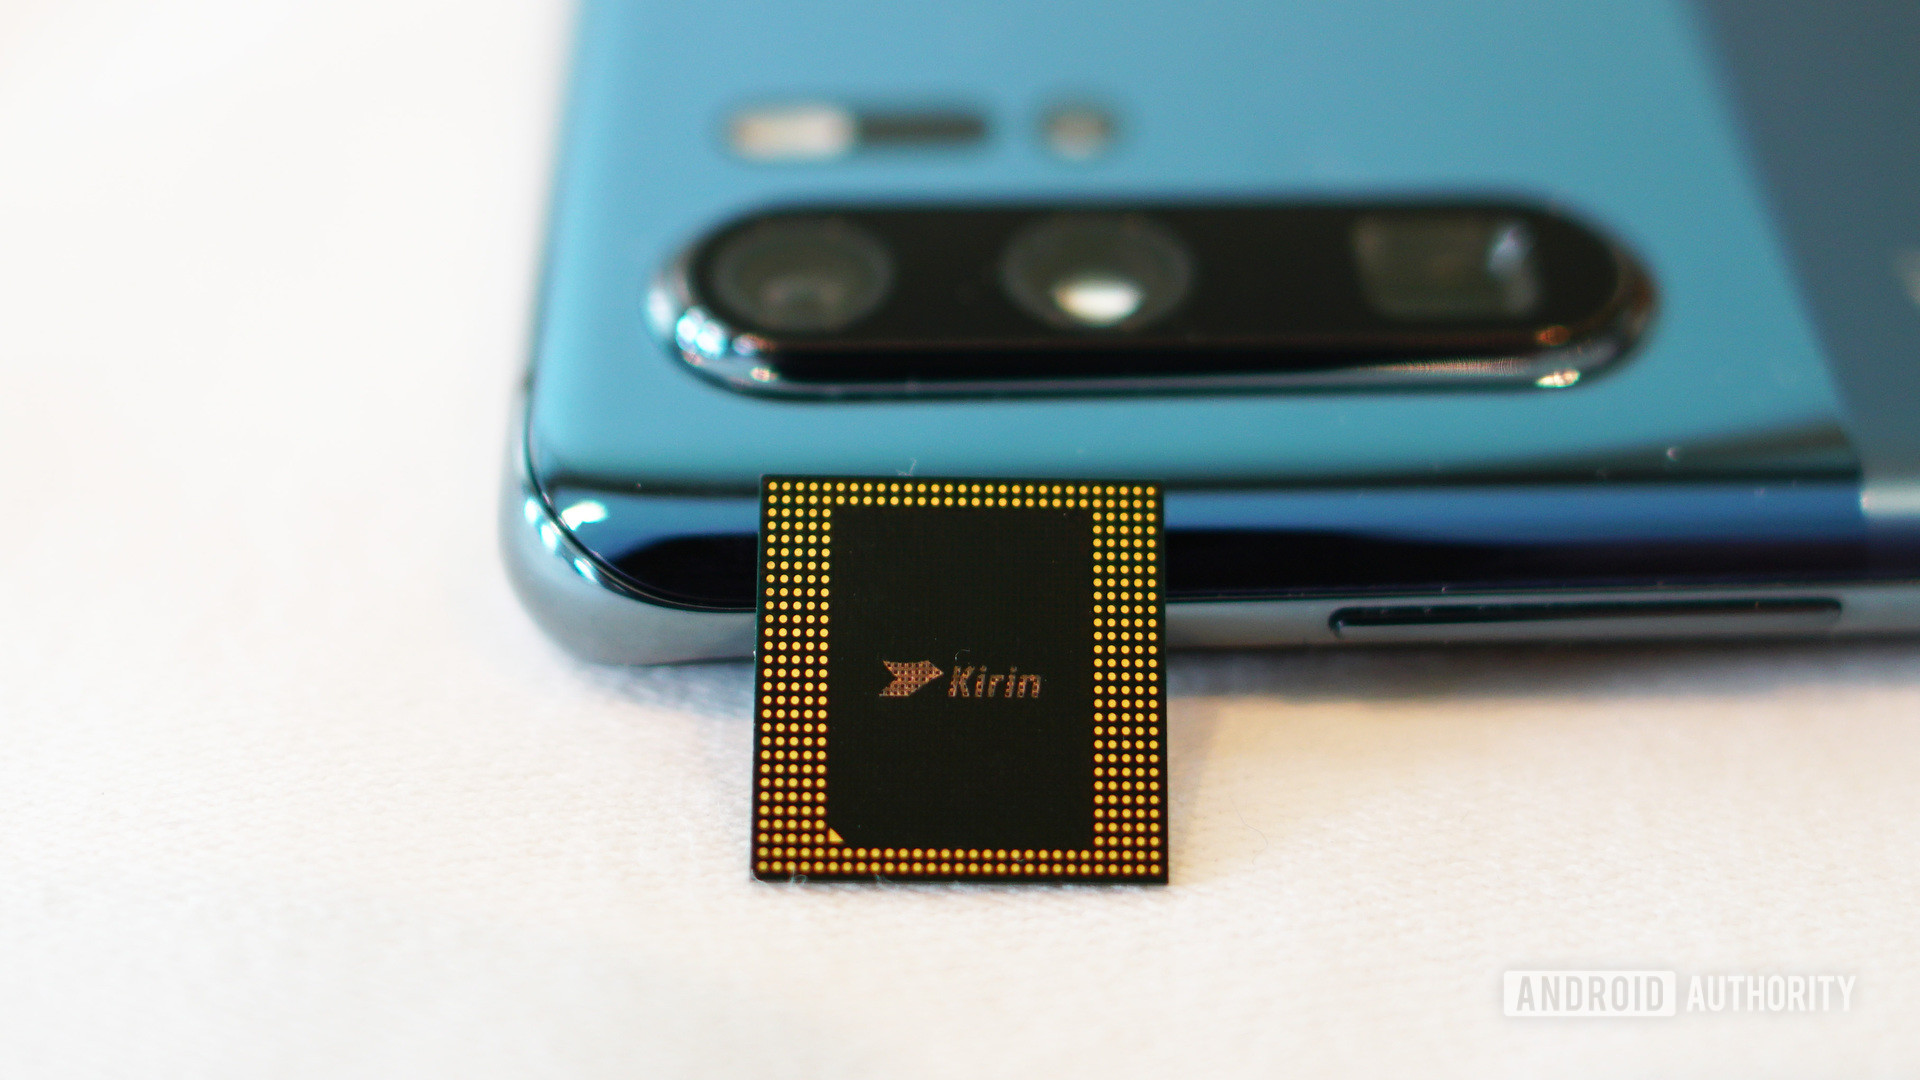 Kirin 990 with HUAWEI P30 Pro camera in background - what is Moore's law